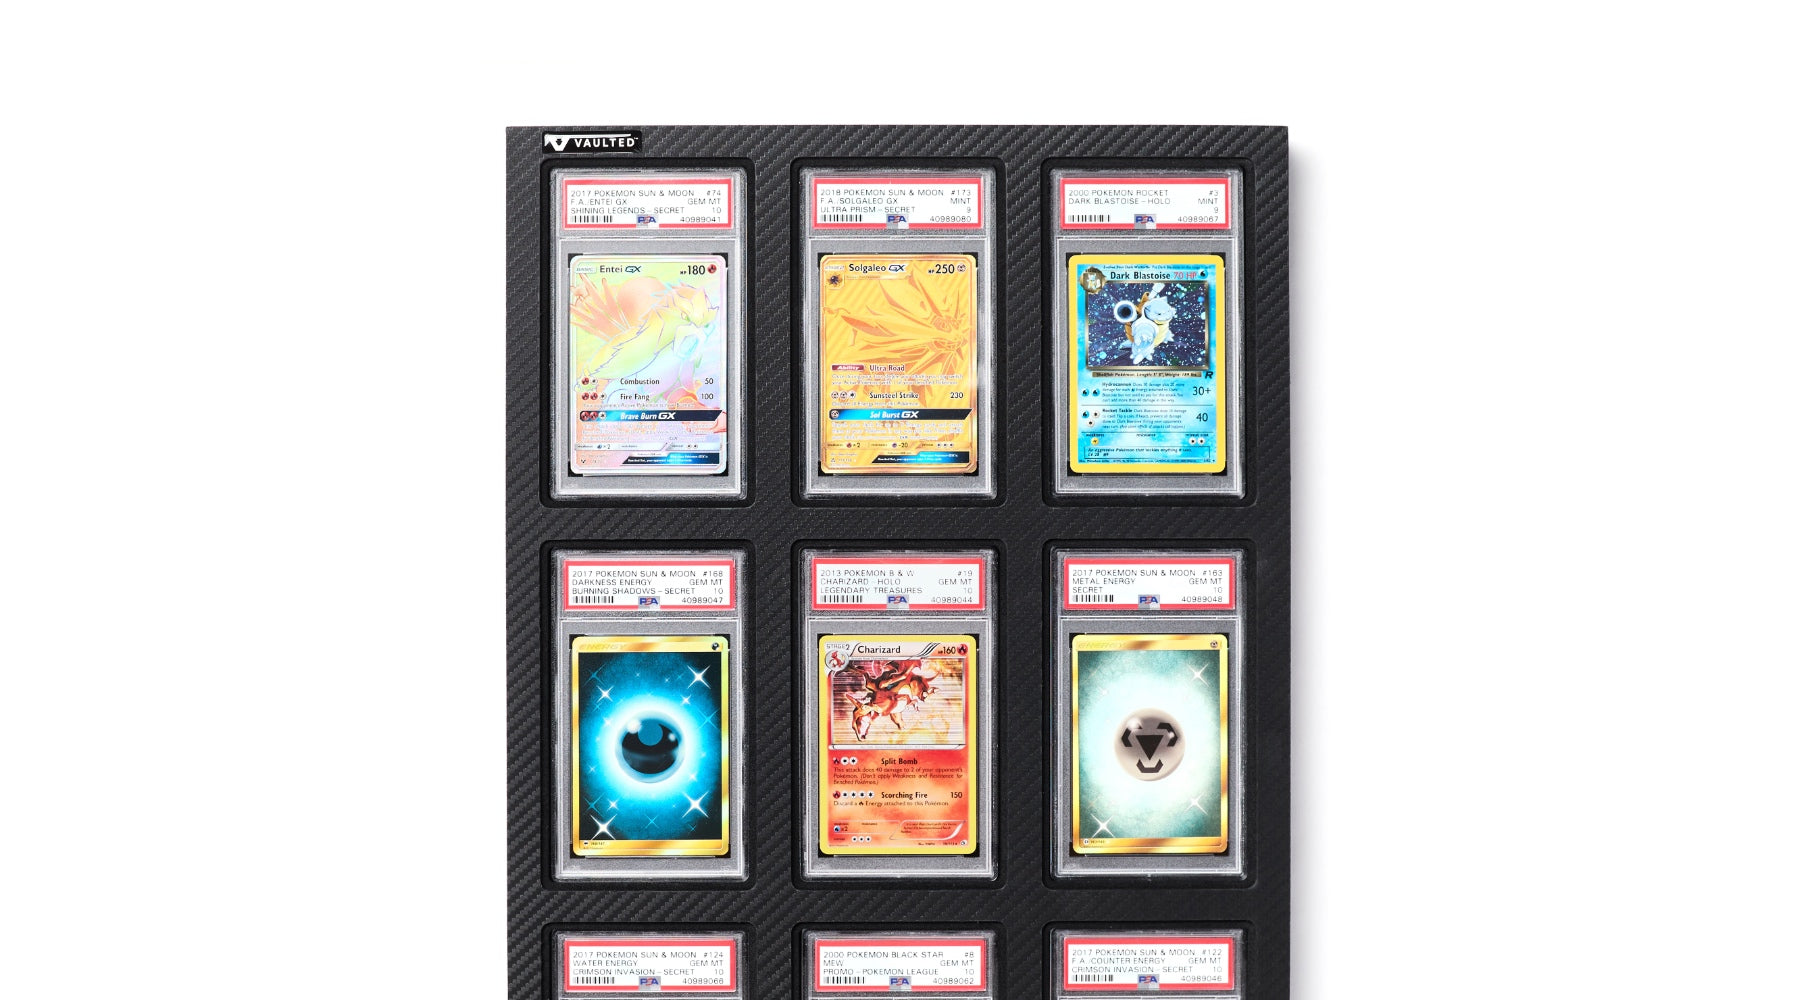 Vaulted Display Vault Air Card Edition -- the ultimate display for trading cards.